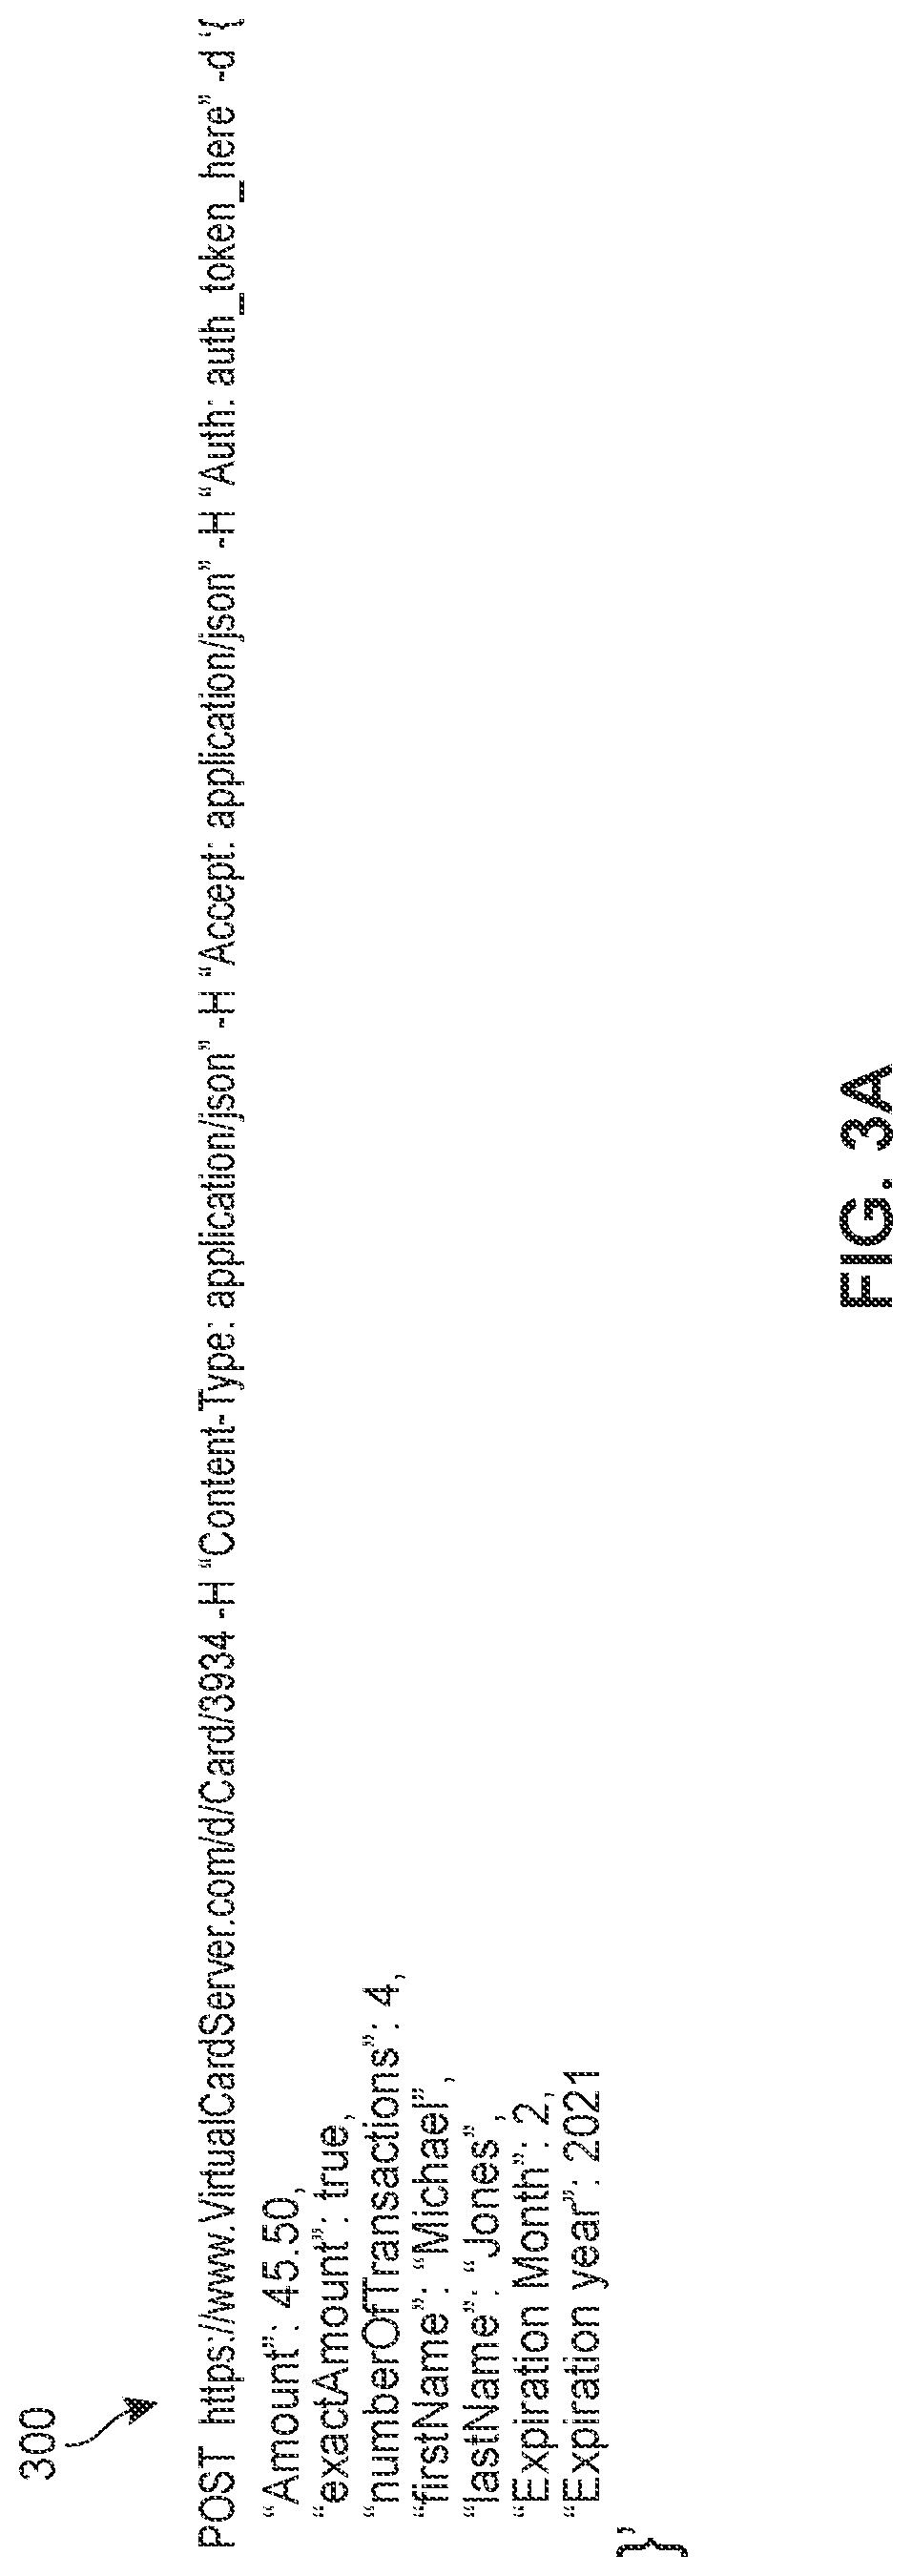 Secure product provisioning systems and methods for preventing electronic fraud by generation of ephemeral virtual cards for injection from secure proxy accounts into electronic provisioning networks